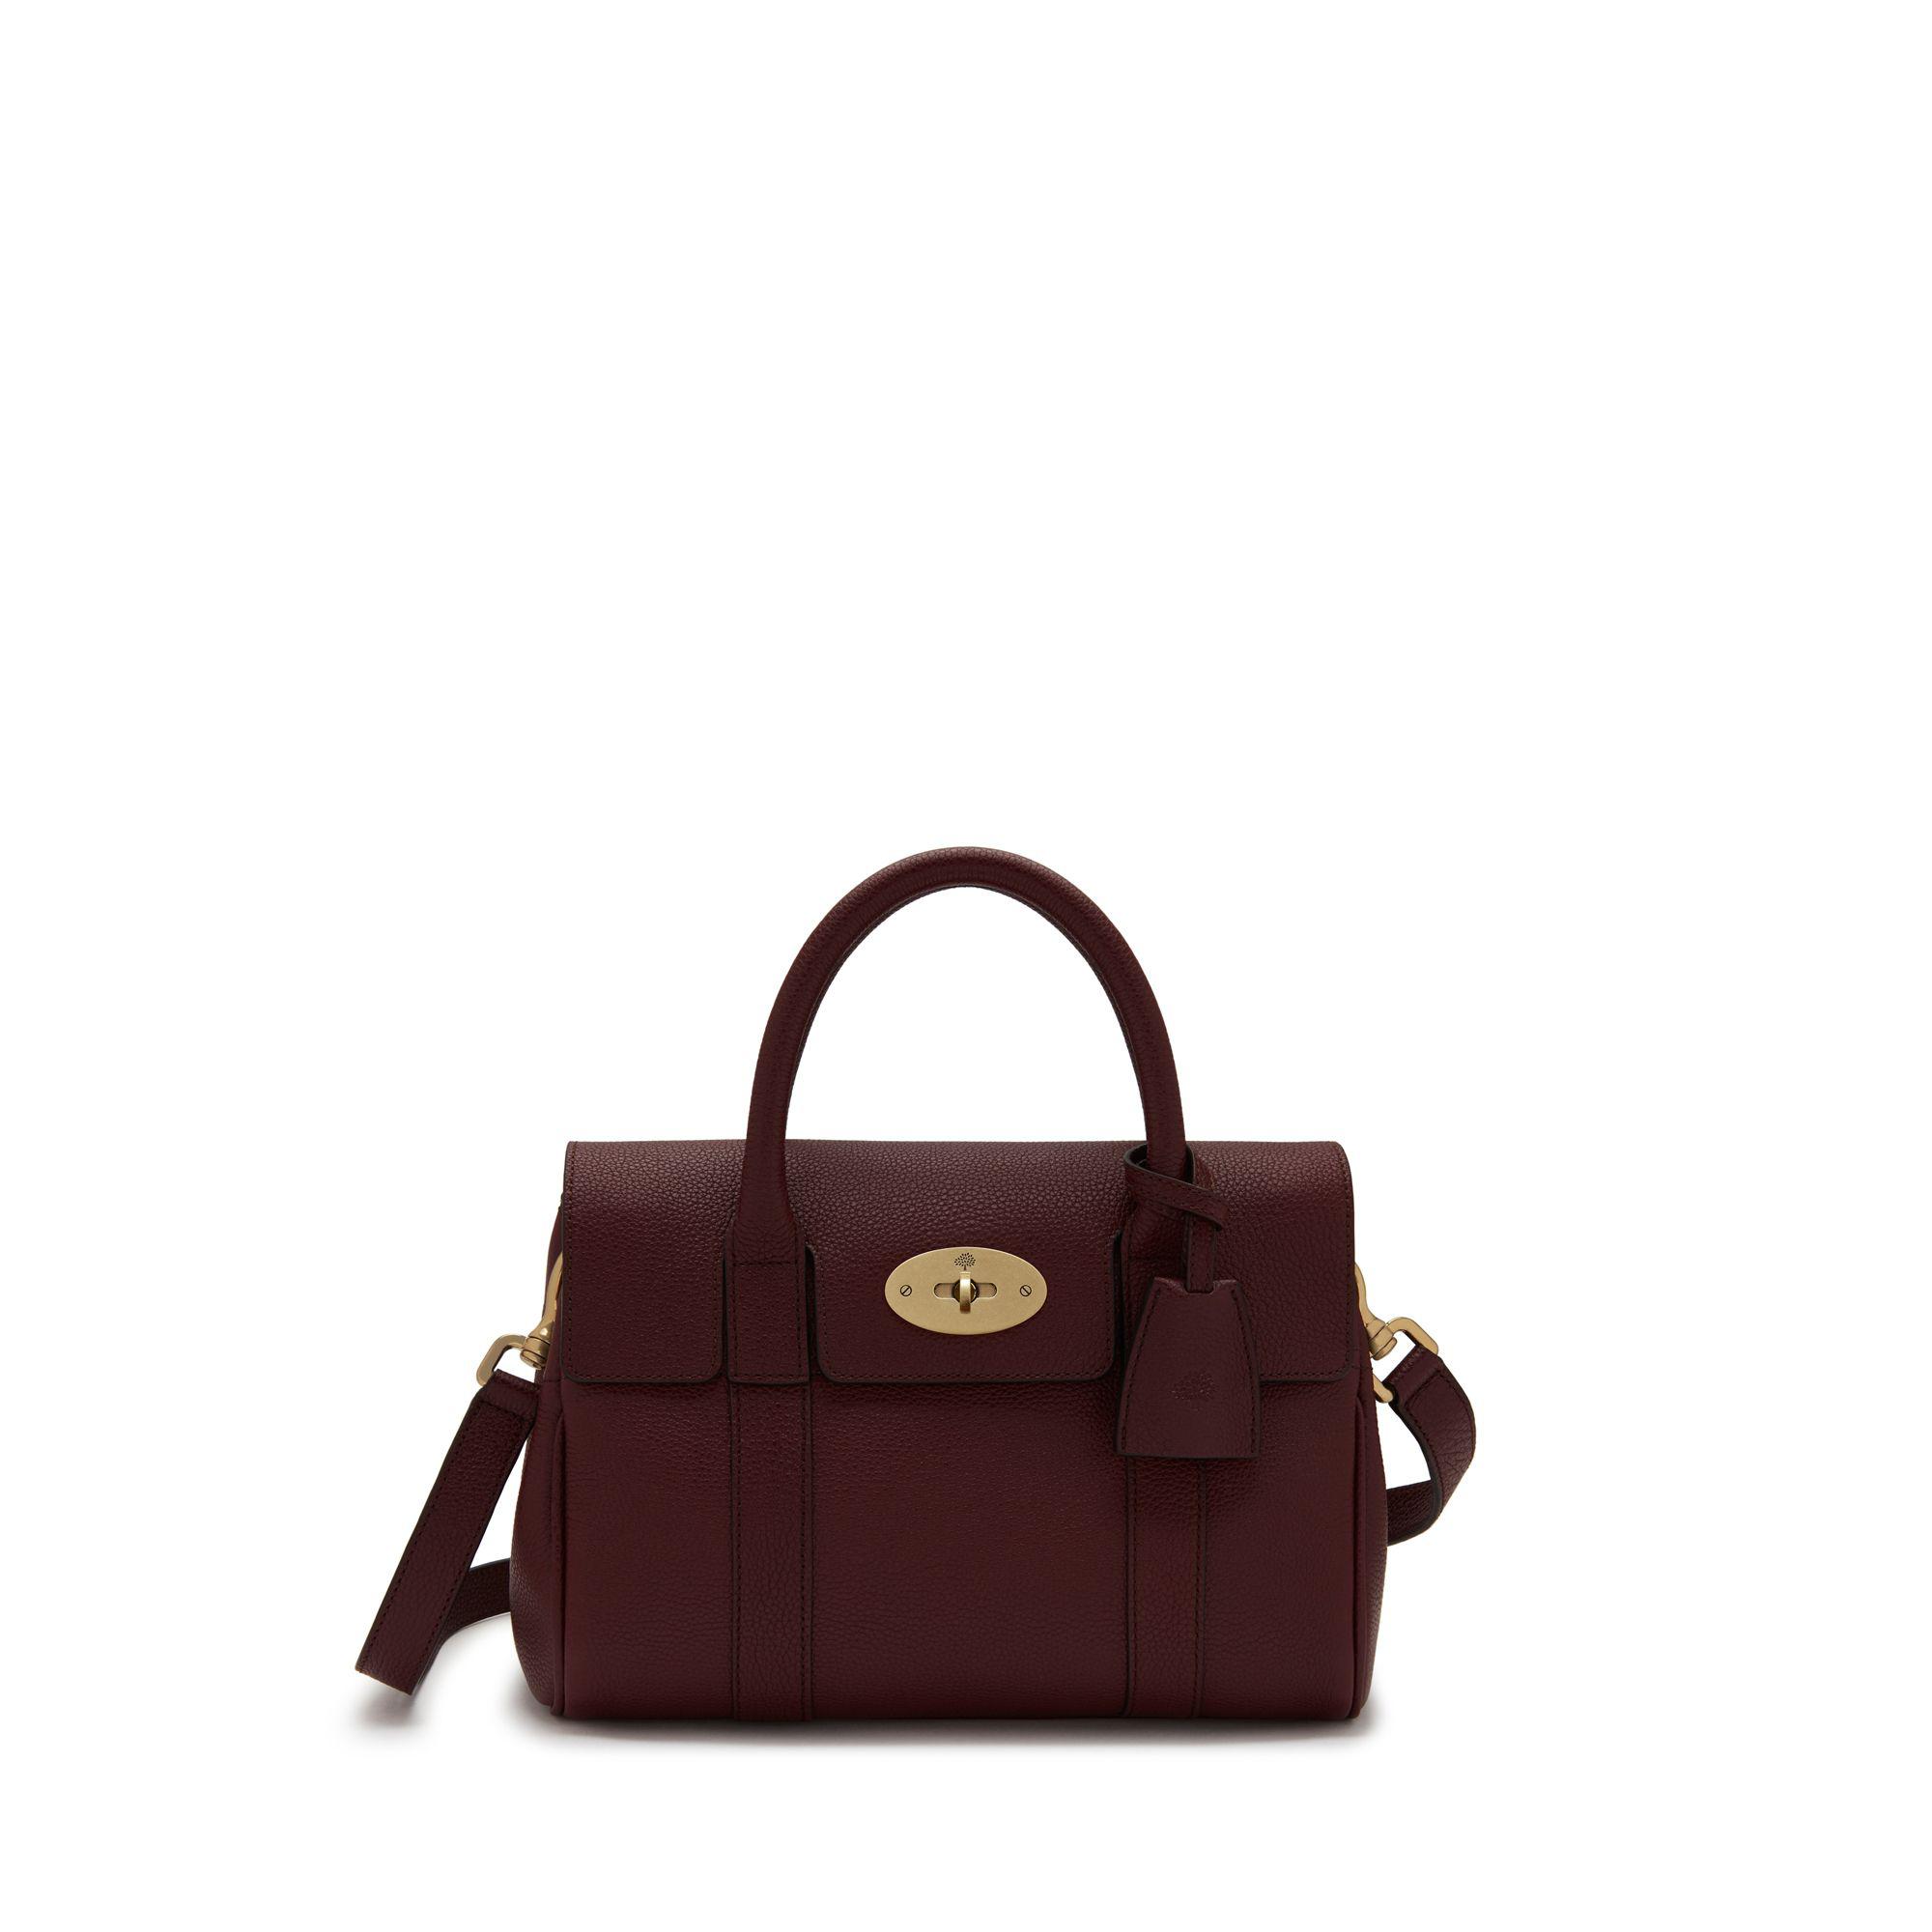 Mulberry Leather Small Bayswater Satchel In Oxblood Classic Grain - Lyst